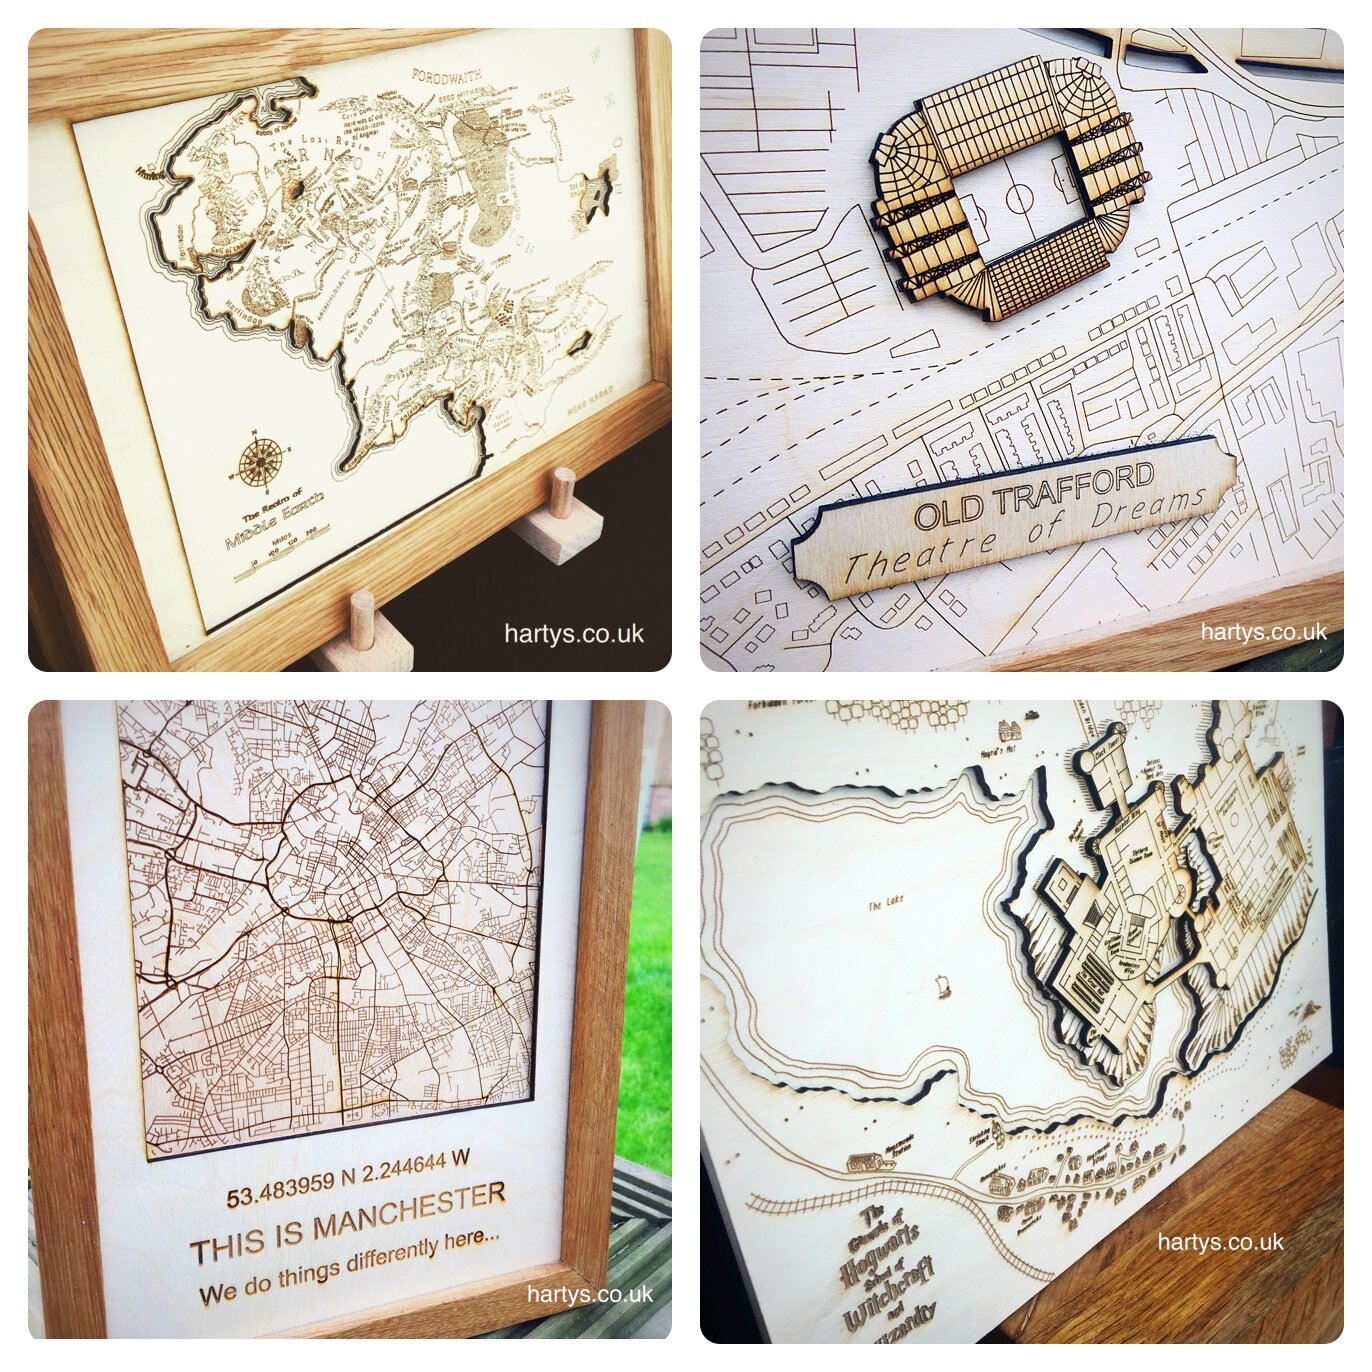 INTRODUCING OUR HAND DRAWN 3D MAPS! - Our Oak Framed Maps proved to be very popular during our week at John Lewis, we completely sold out of our Hogwarts, Middle Earth, Game of Thrones and Old Trafford Maps!But do not fear, we are back in the workshop making again, so please order with confidence!Check out our current range here, Etihad, Maine Road and Anfield Stadium are in production, so please get in contact to order.We can create any map for a special occasion - wedding, anniversary or birthday. Please contact us to enquire.